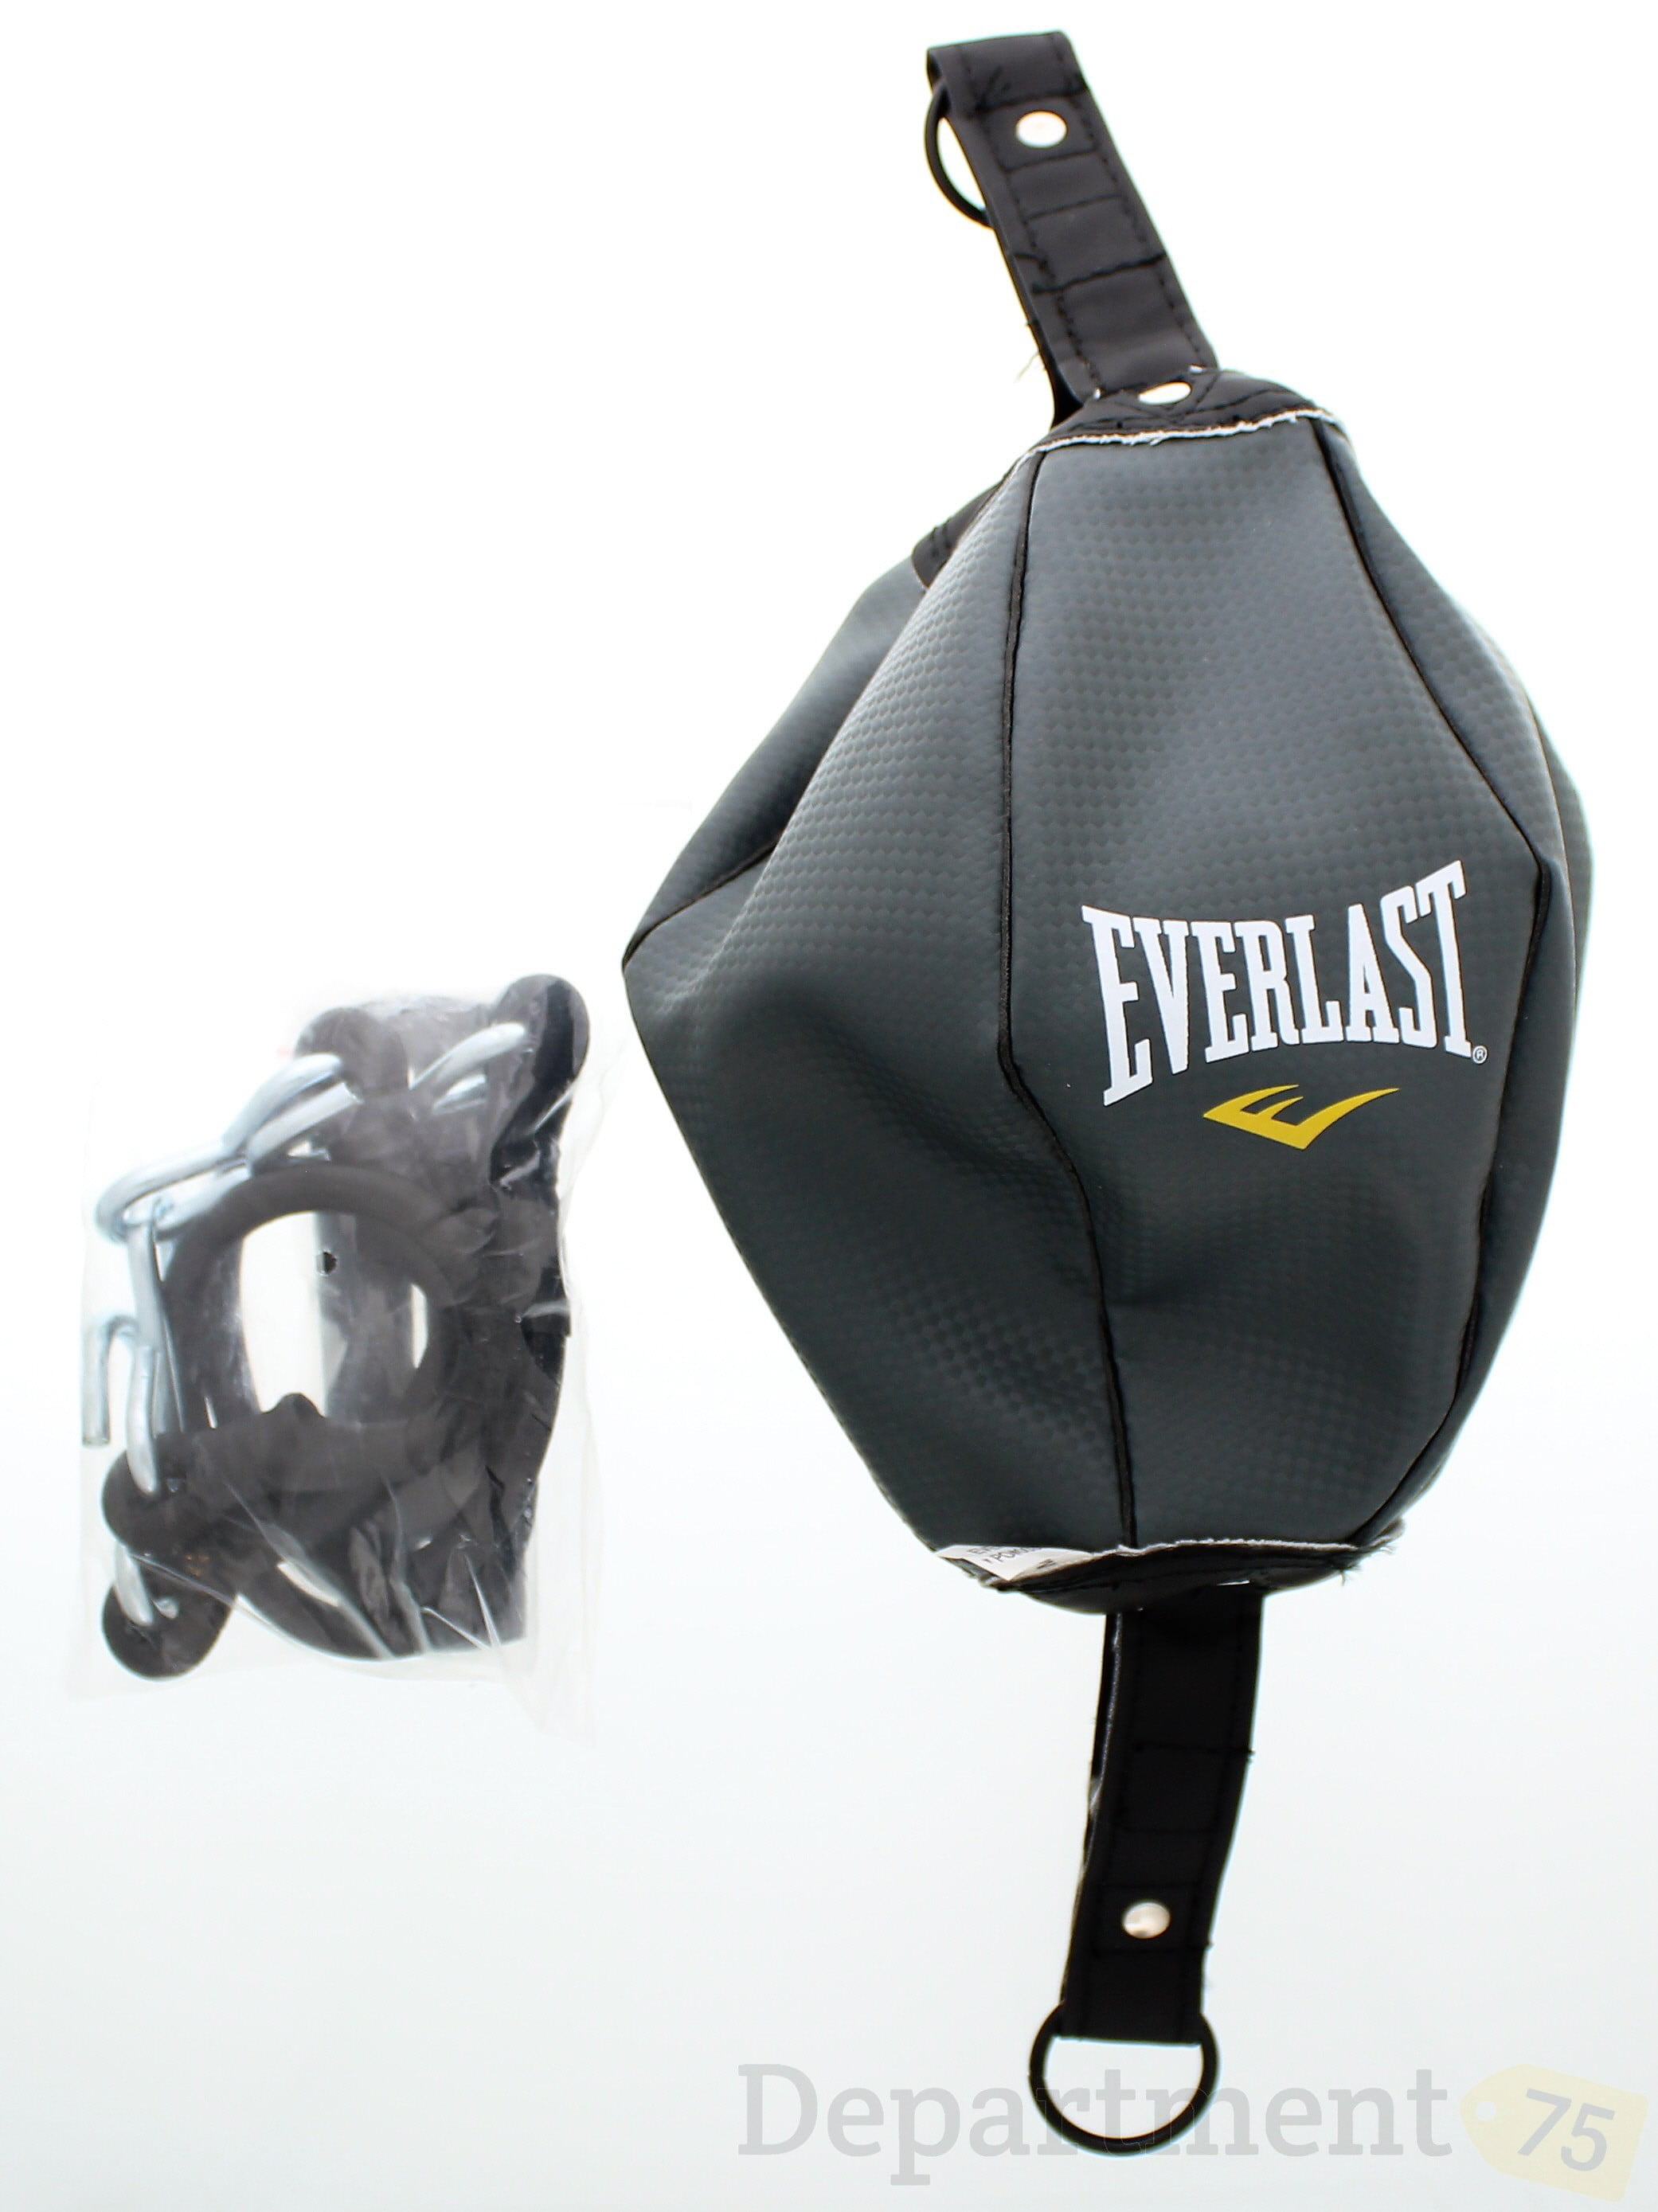 Punching Bags For Sale At Walmart